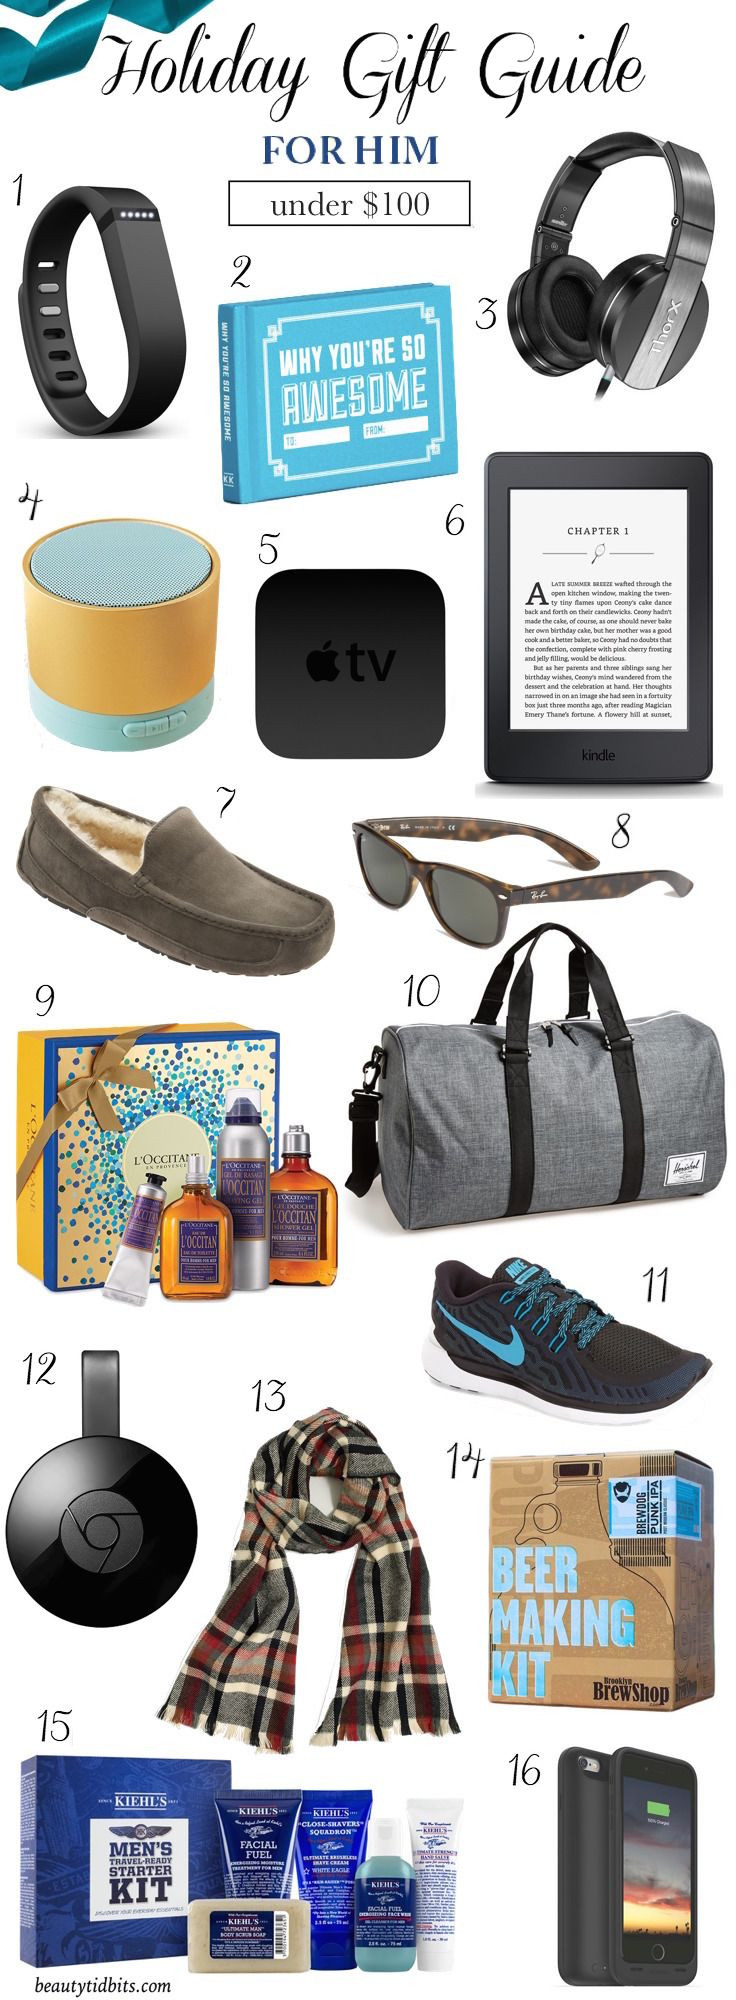 Male Birthday Gift Ideas
 16 Holiday Gifts Your Man Will Love And Actually Use